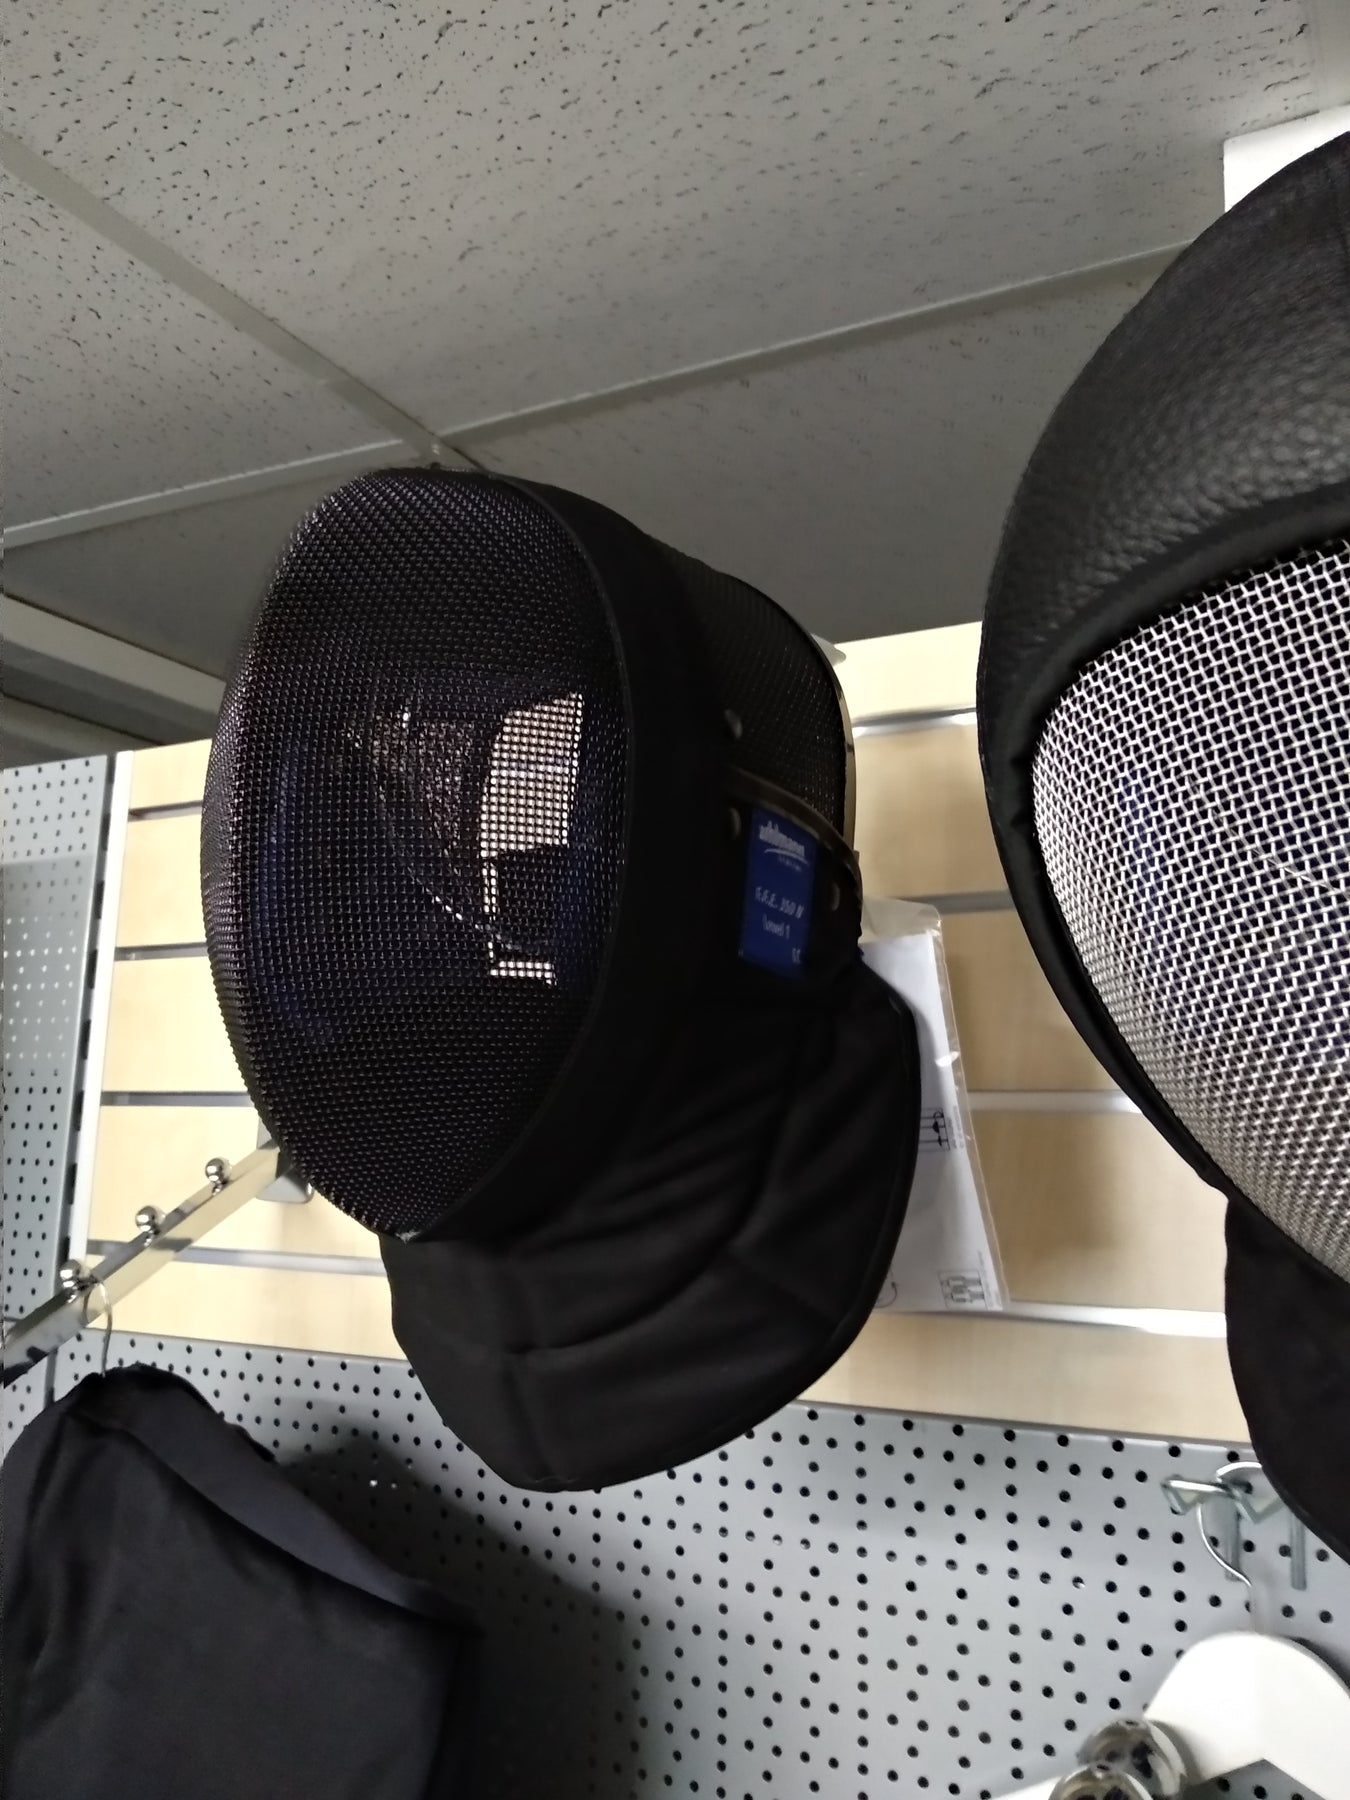 Fencing masks & accessories